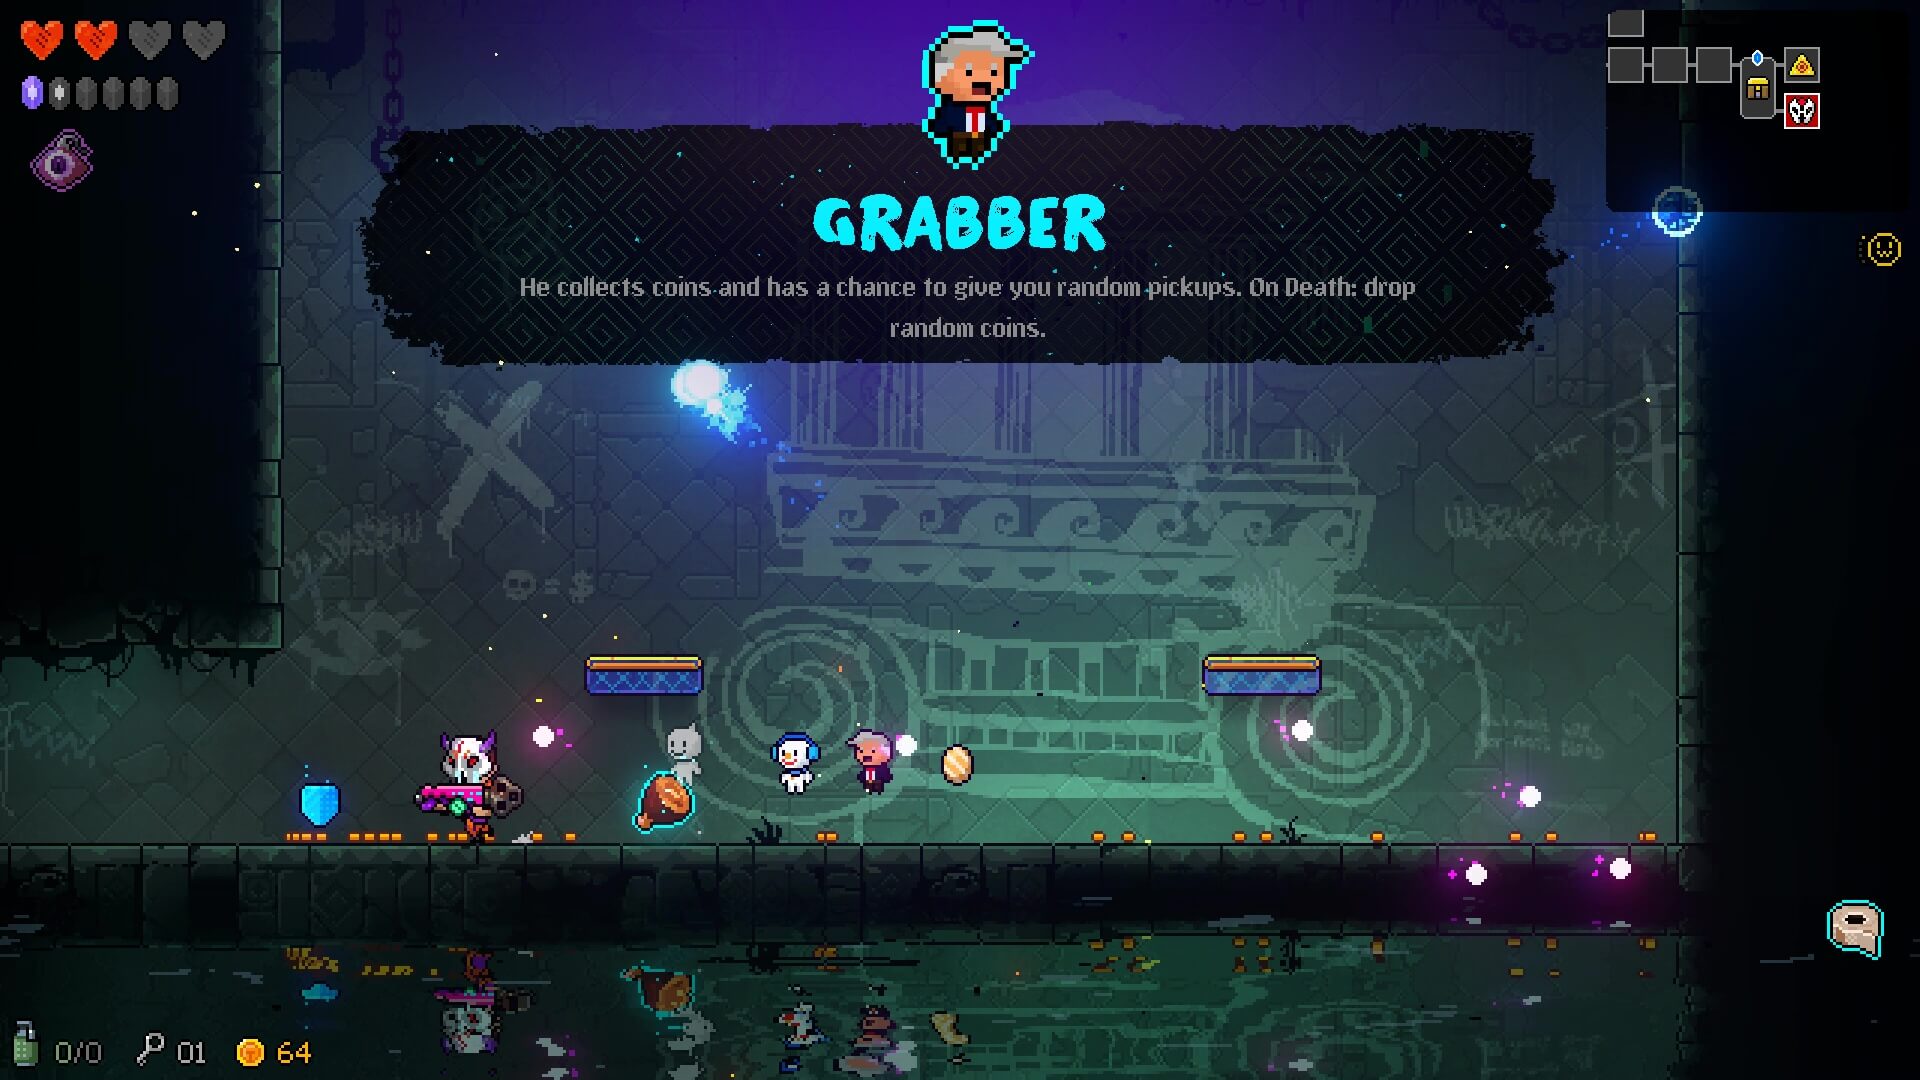 The Grabber pet in Neon Abyss